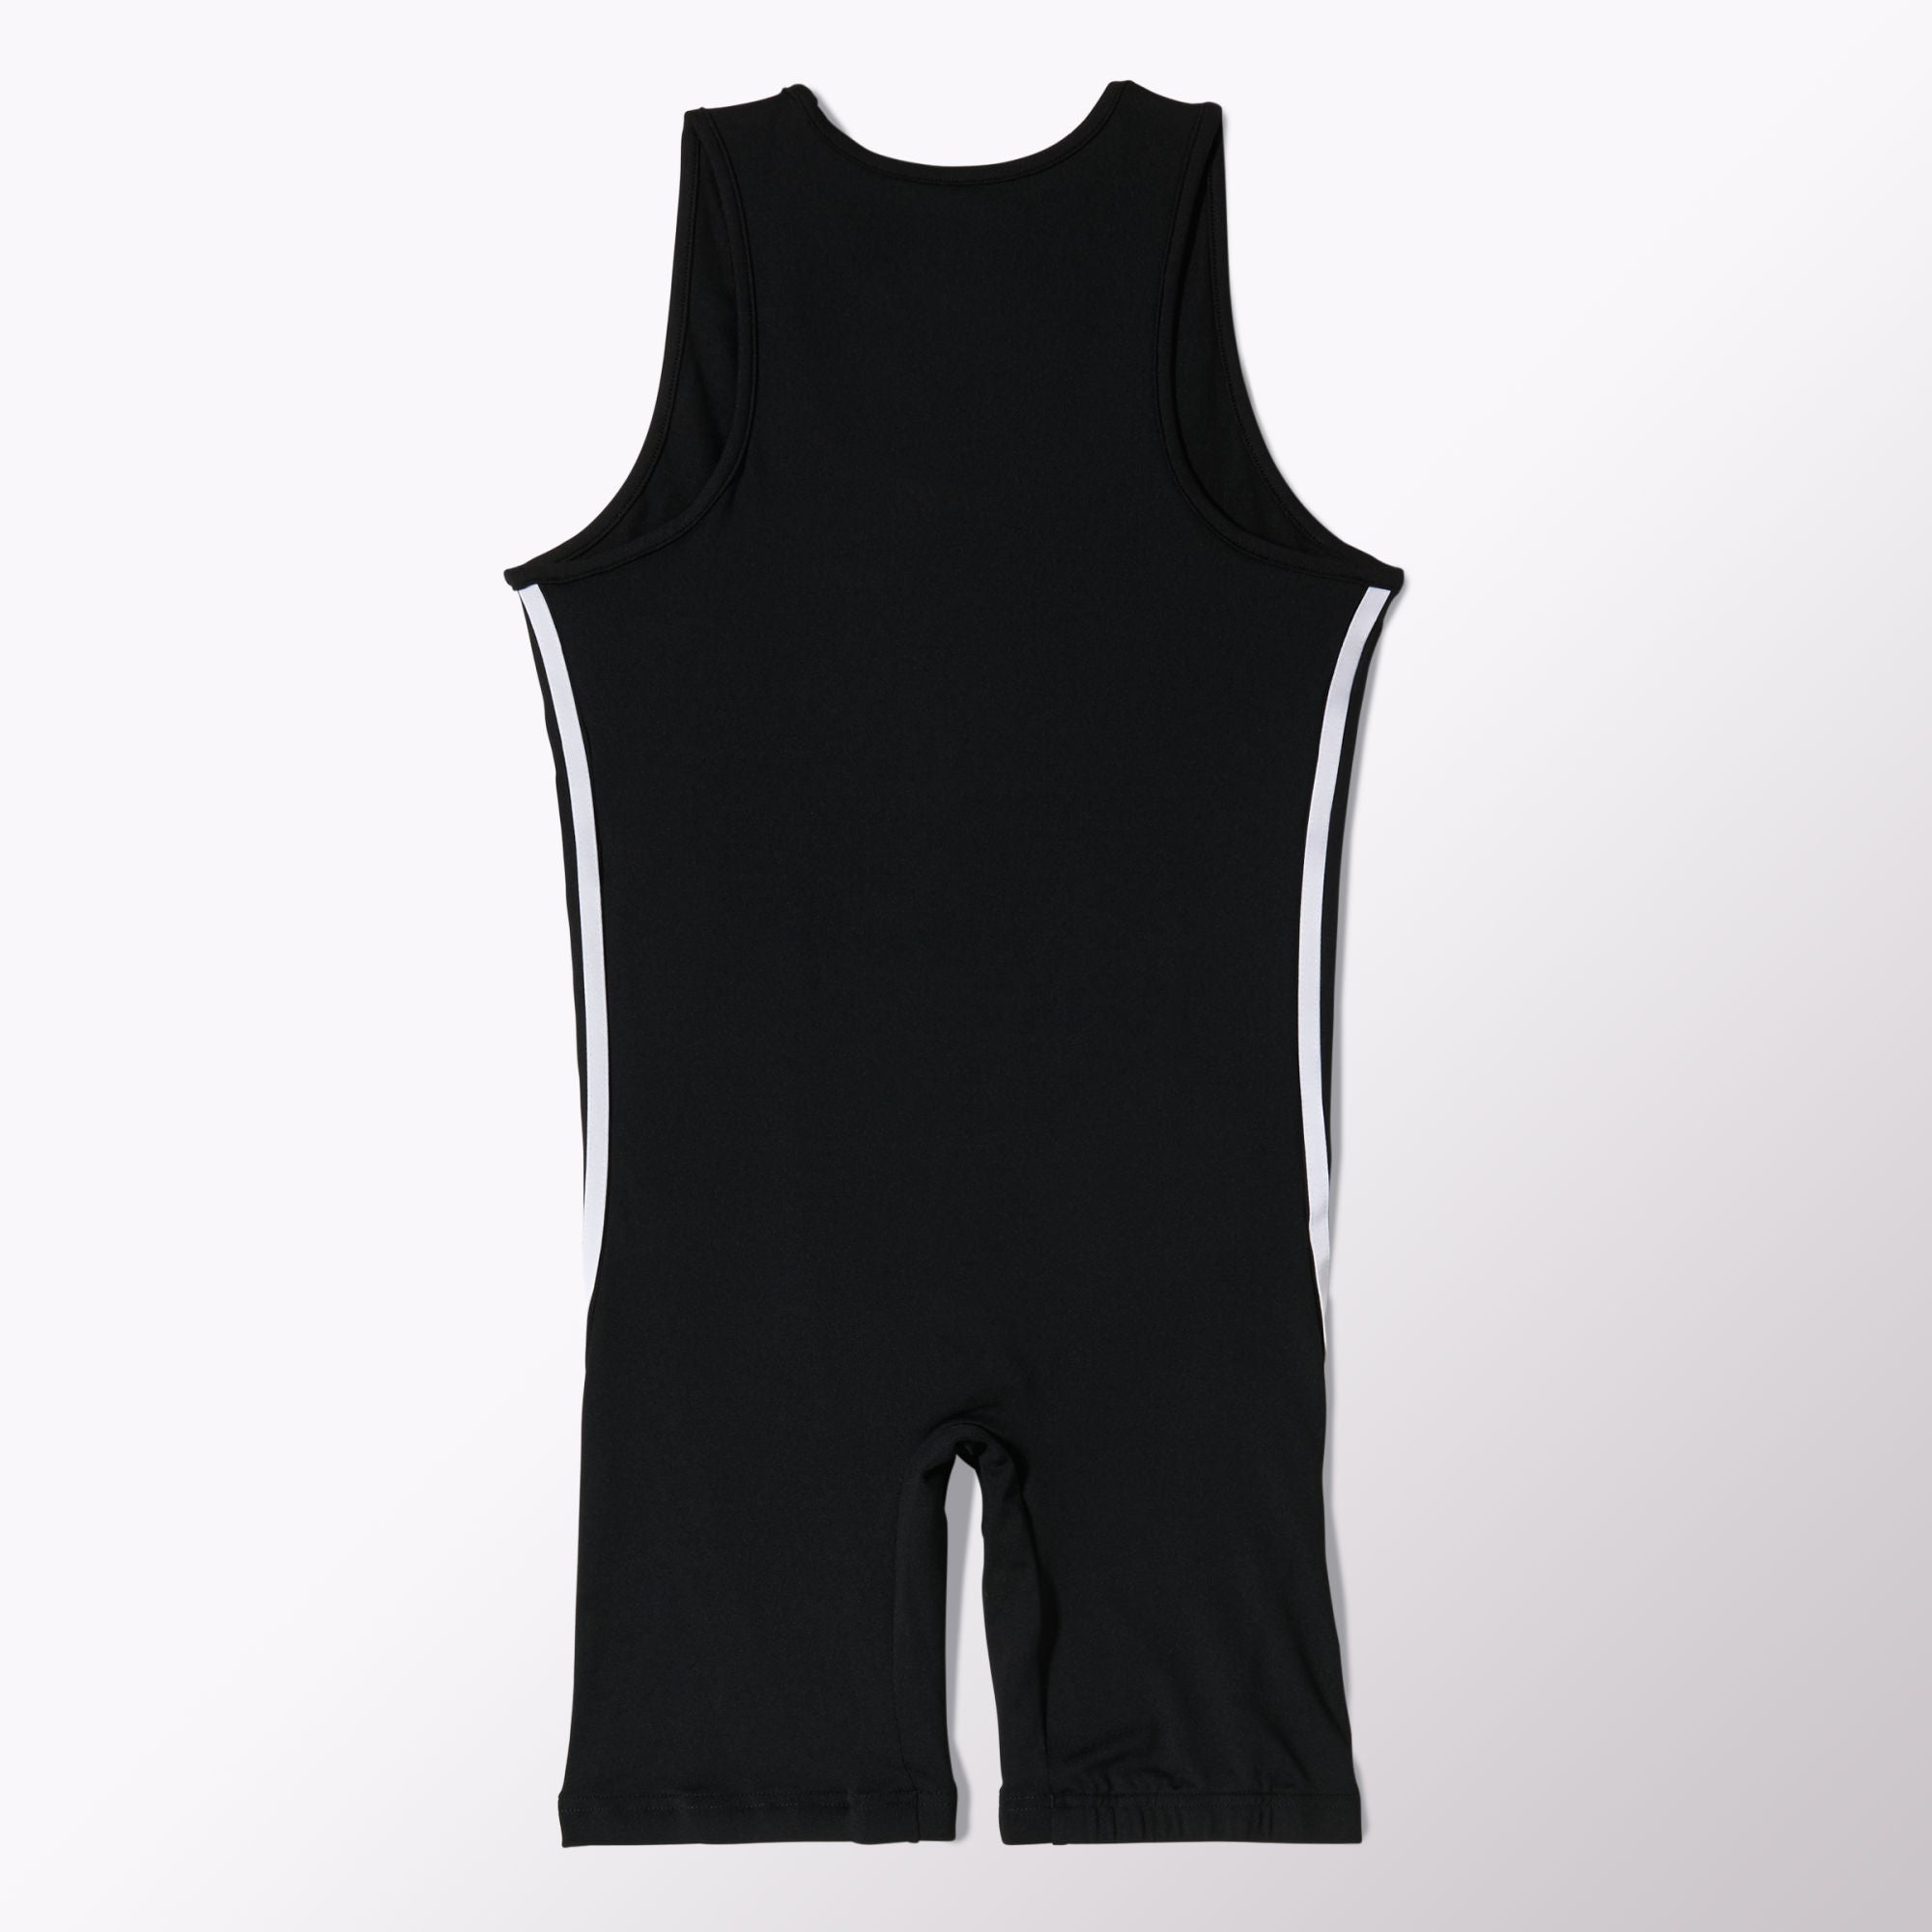 Lifter Suit - - Standard Issue